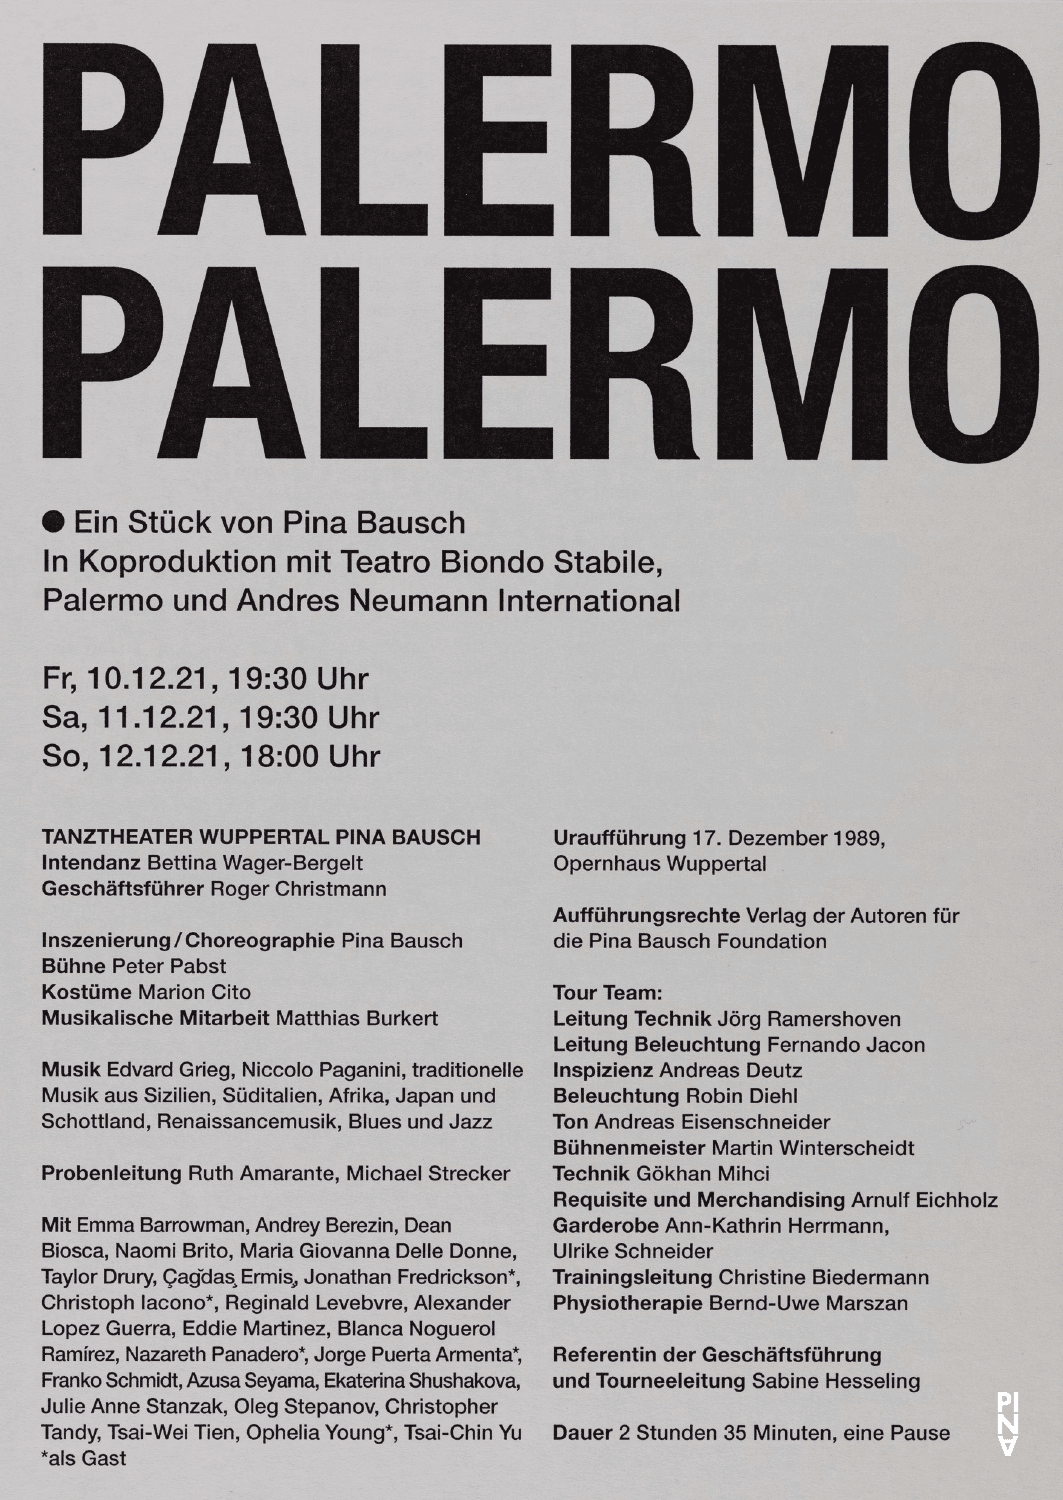 Evening leaflet for “Palermo Palermo” by Pina Bausch with Tanztheater Wuppertal in in Ludwigshafen, 12/10/2021 – 12/12/2021